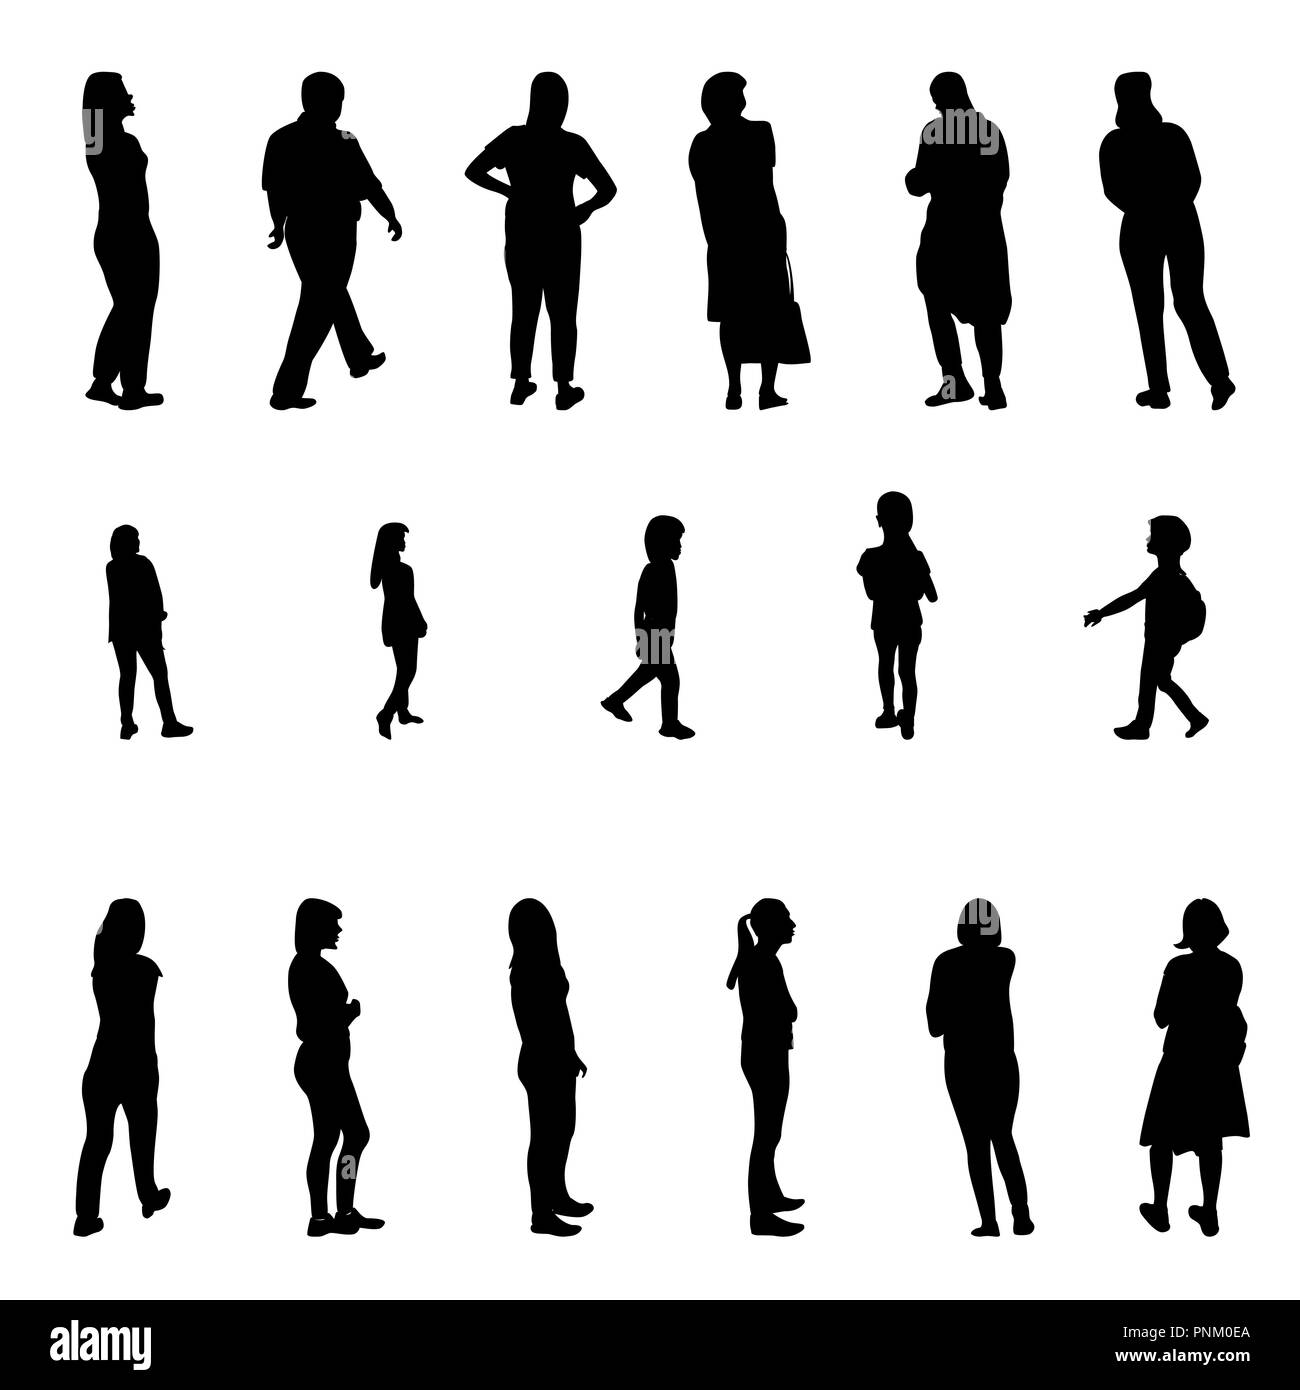 Set of Black and White Silhouette Walking People and Children. Vector Illustration Stock Vector